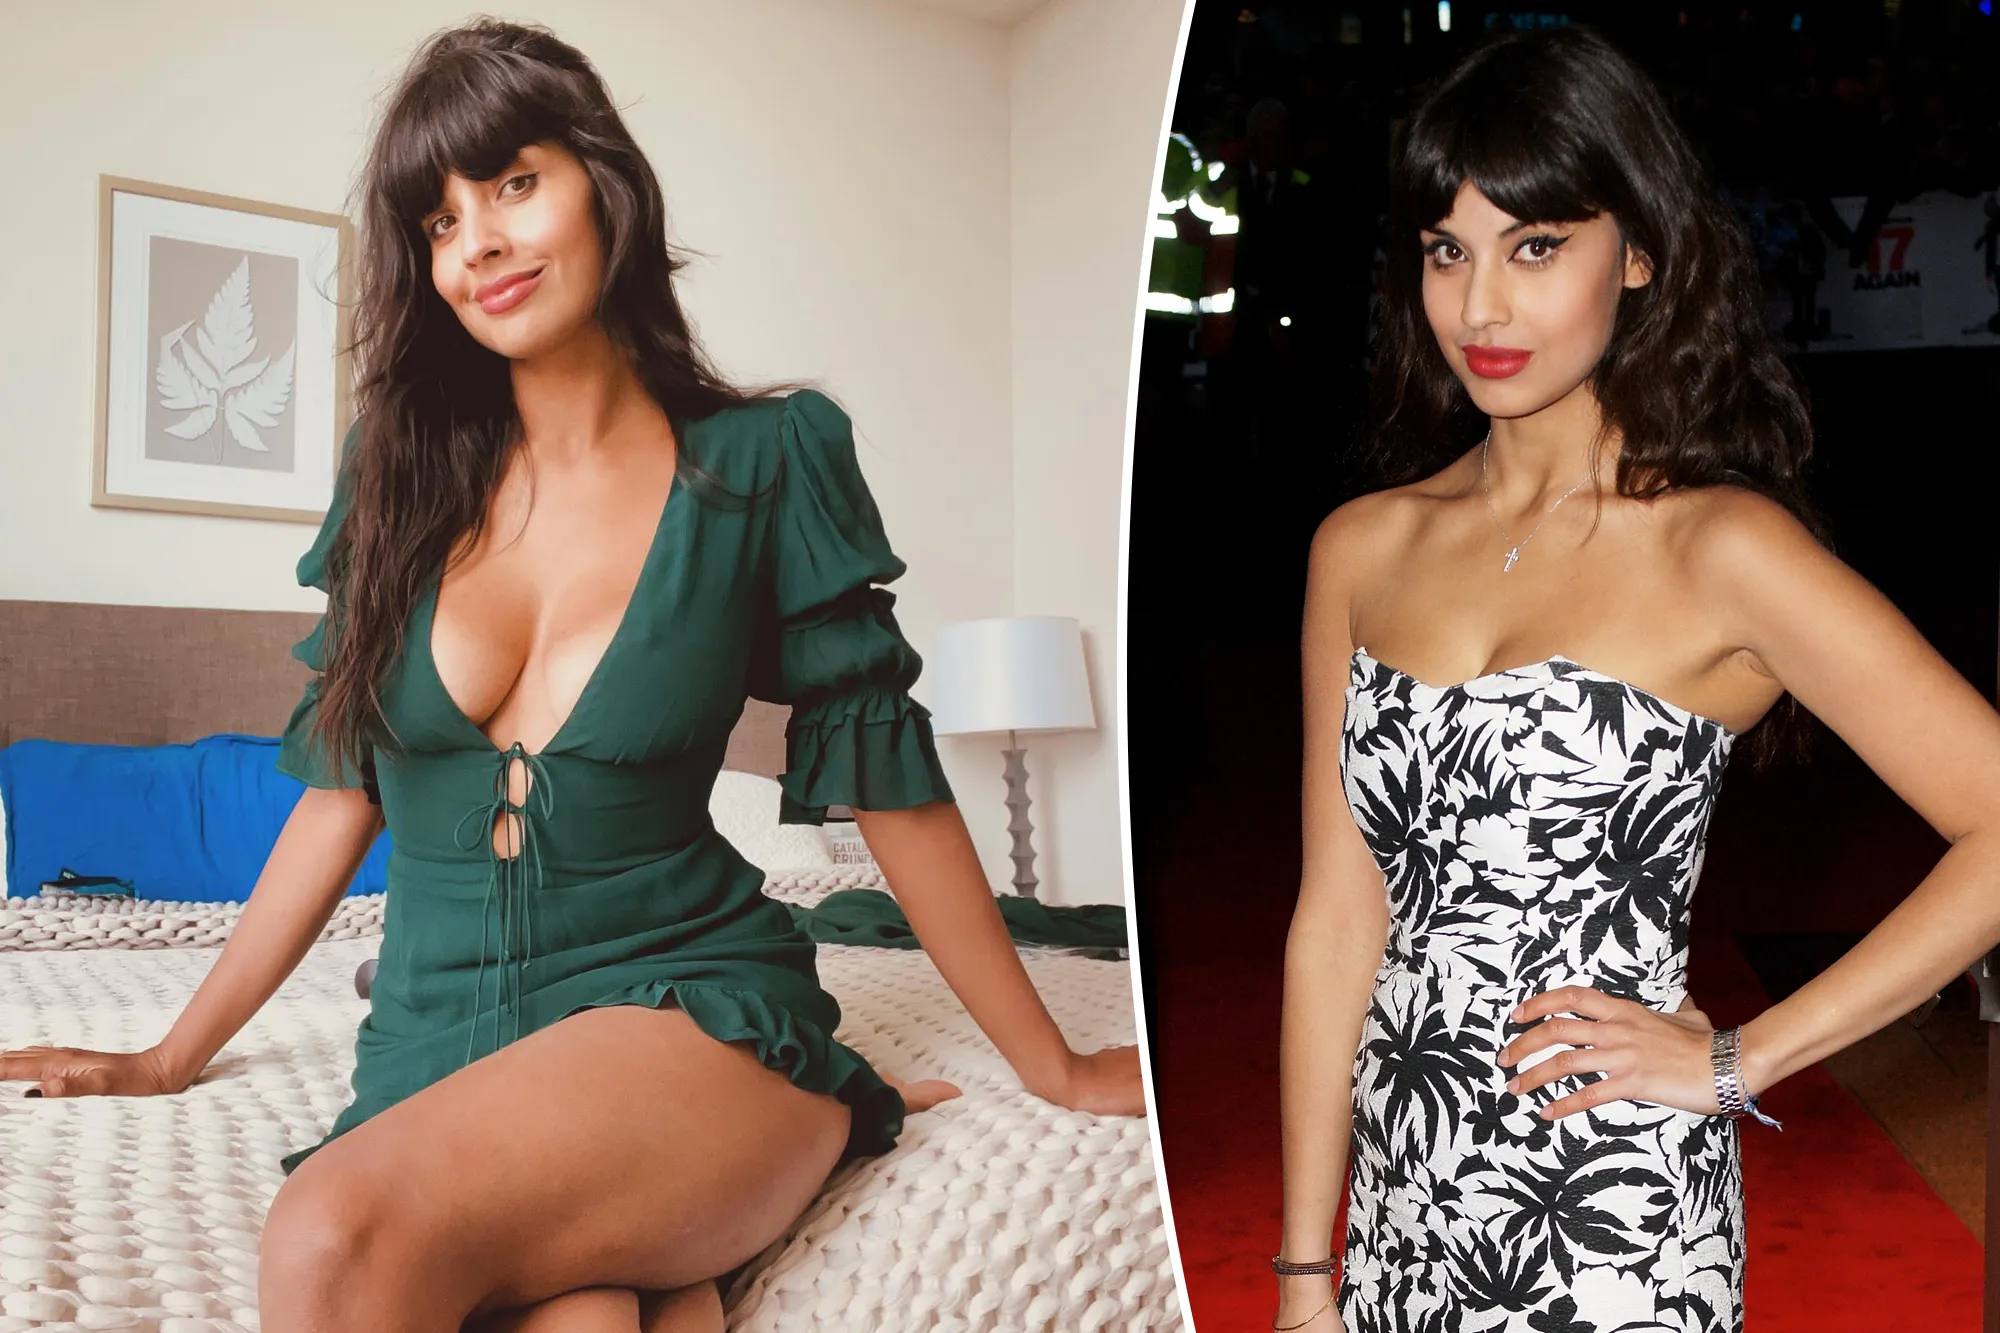 Jameela Jamil ‘destroyed’ her body with laxatives amid eating disorder: ‘Amazed I even still have an a–hole’